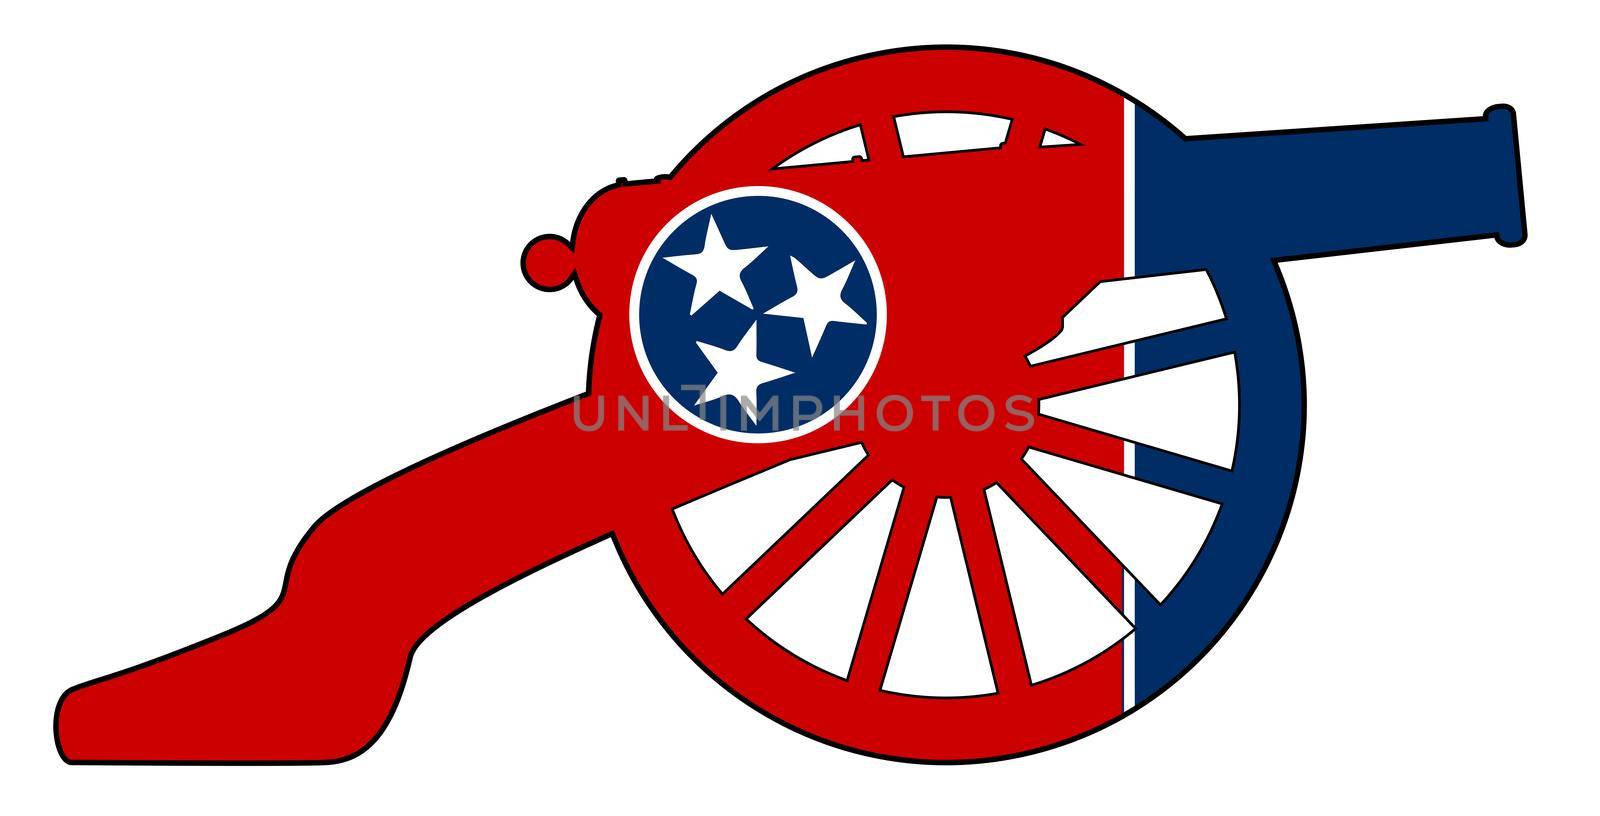 Typical American civil war cannon gun with Tennessee state flag isolated on a white background